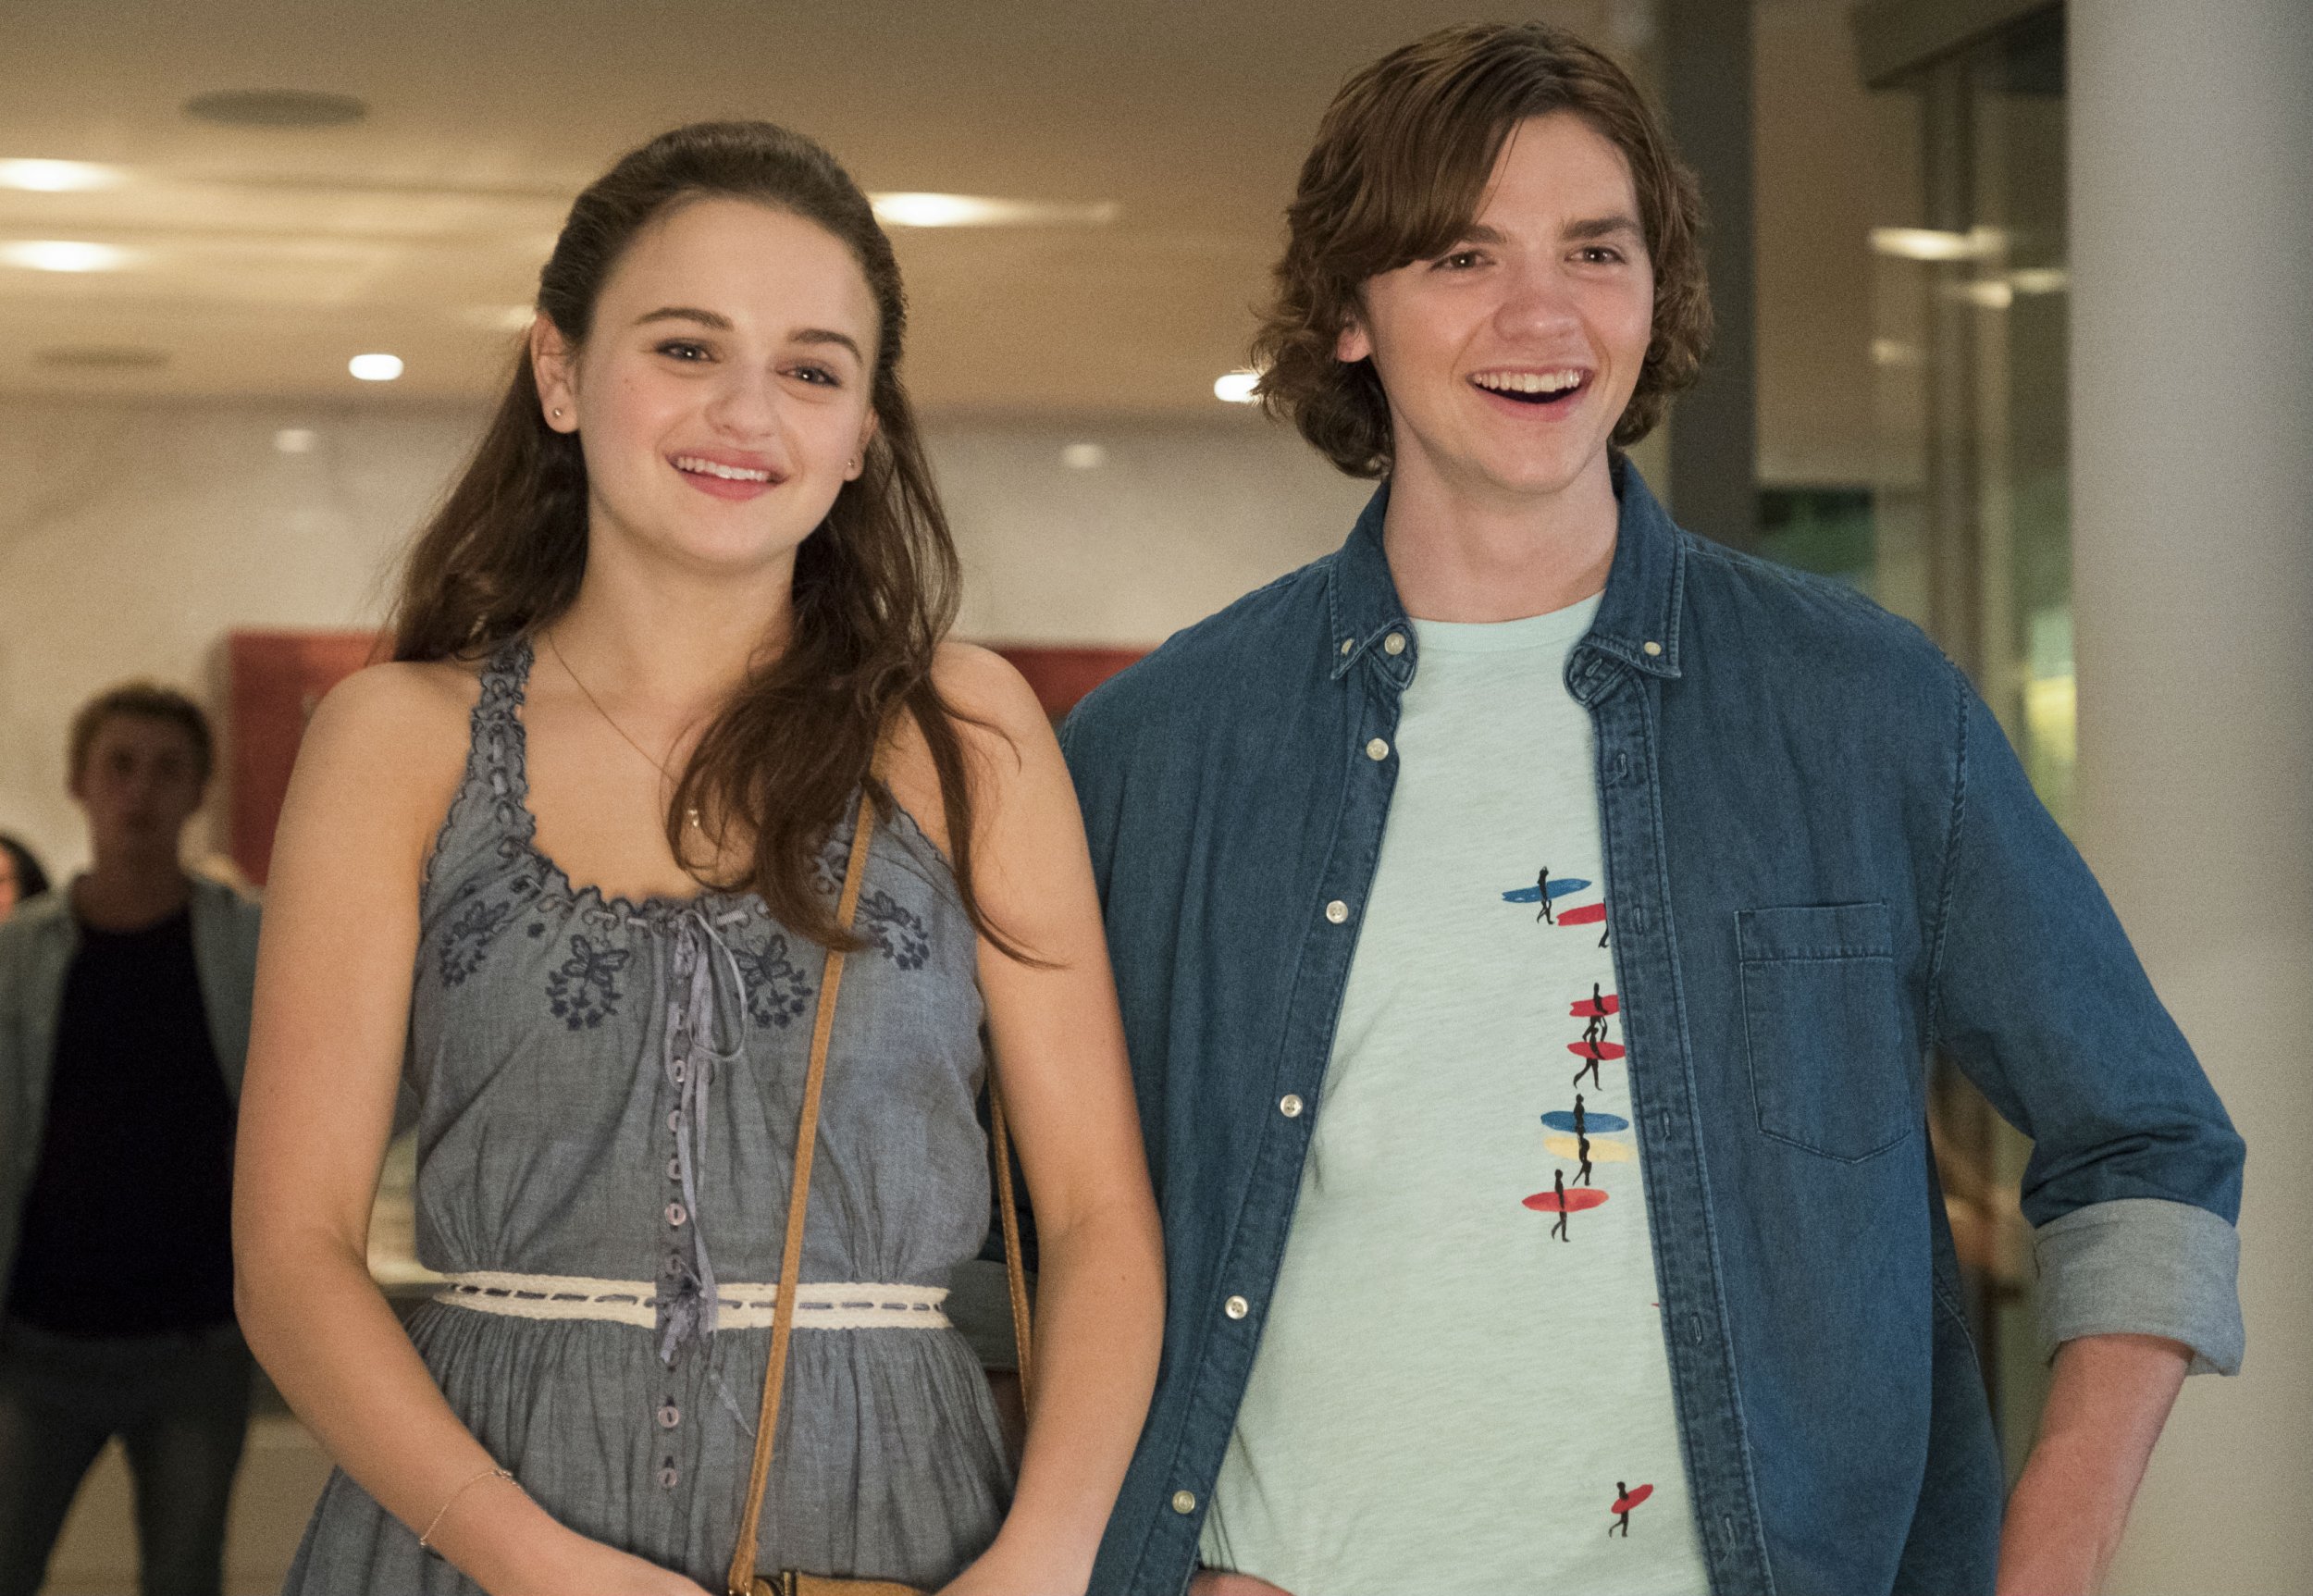 the Kissing Booth 2' Star Joey King on Working With Ex Jacob Elordi